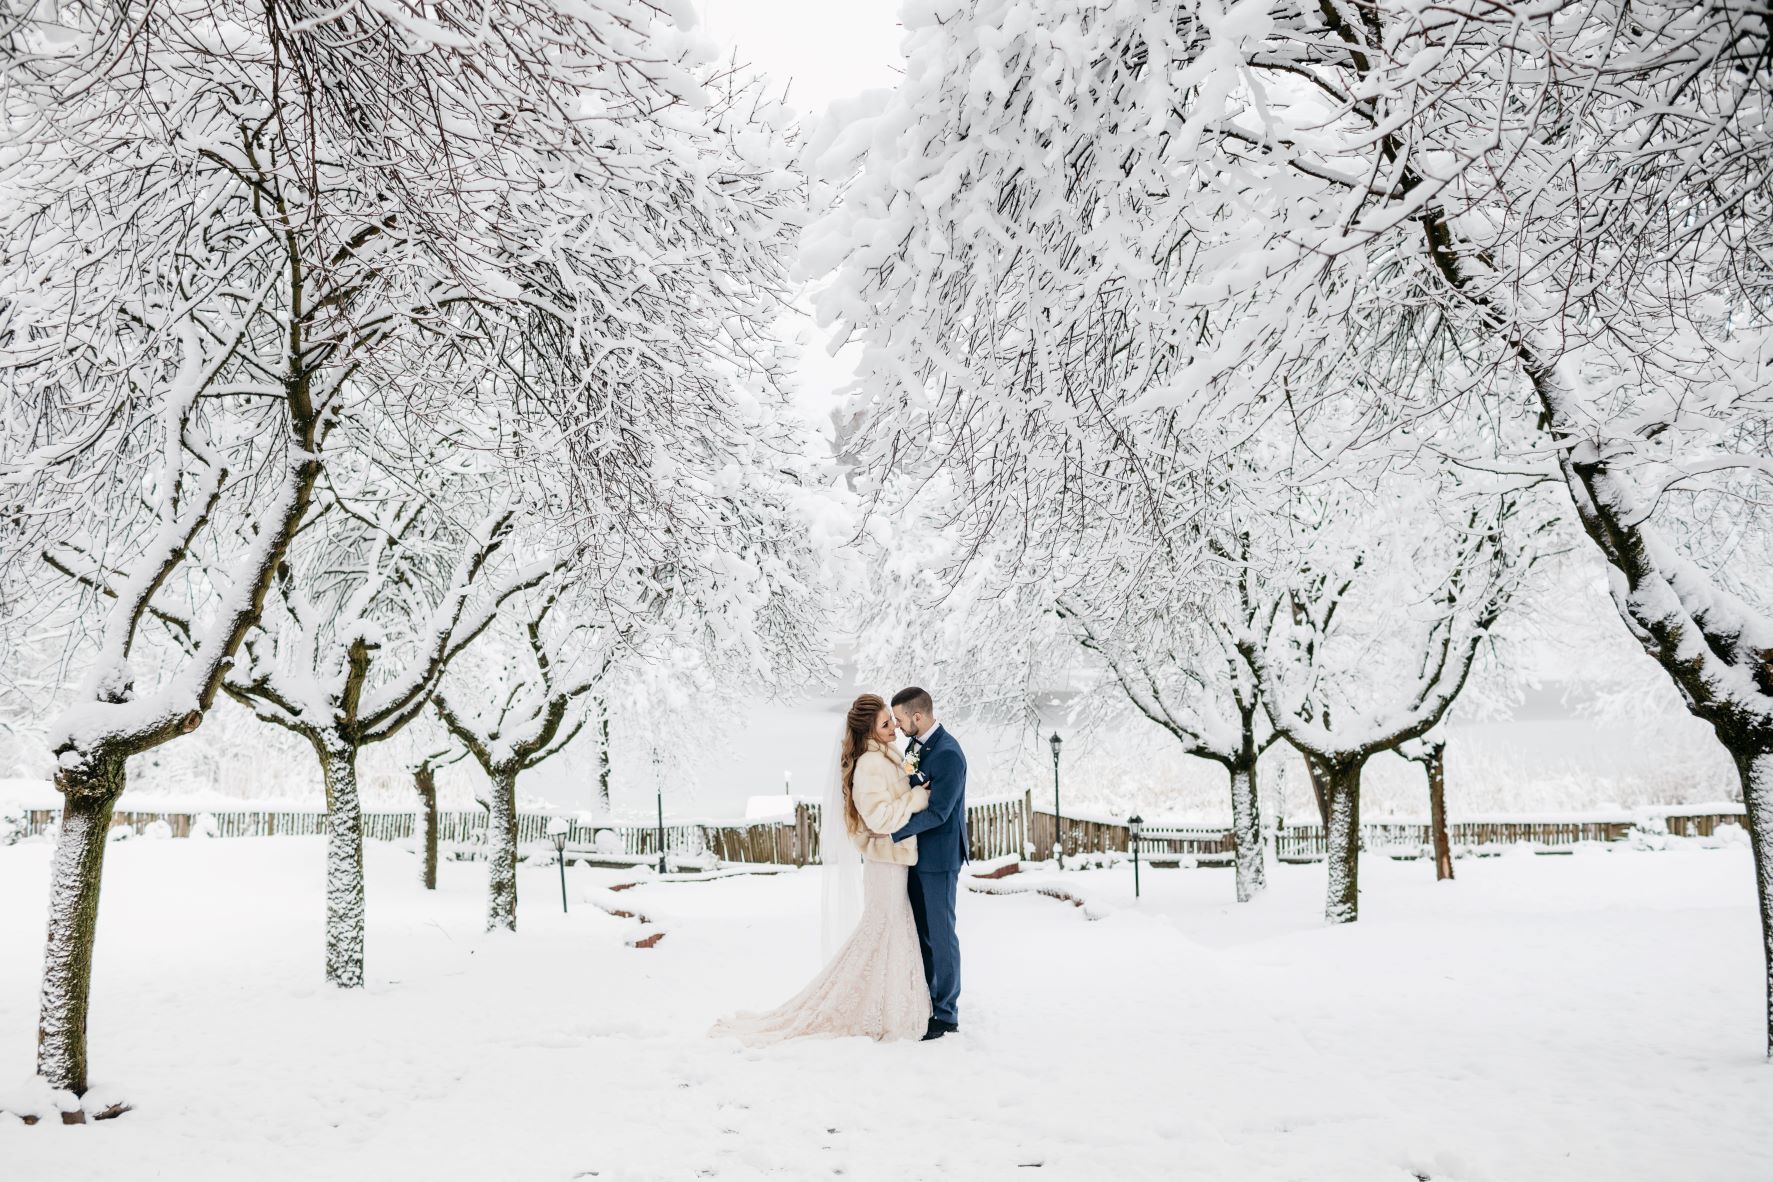 Bride and groom at their winter wedding, surrounded by trees covered in snow, snow on the ground, they are hugging and looking at each other